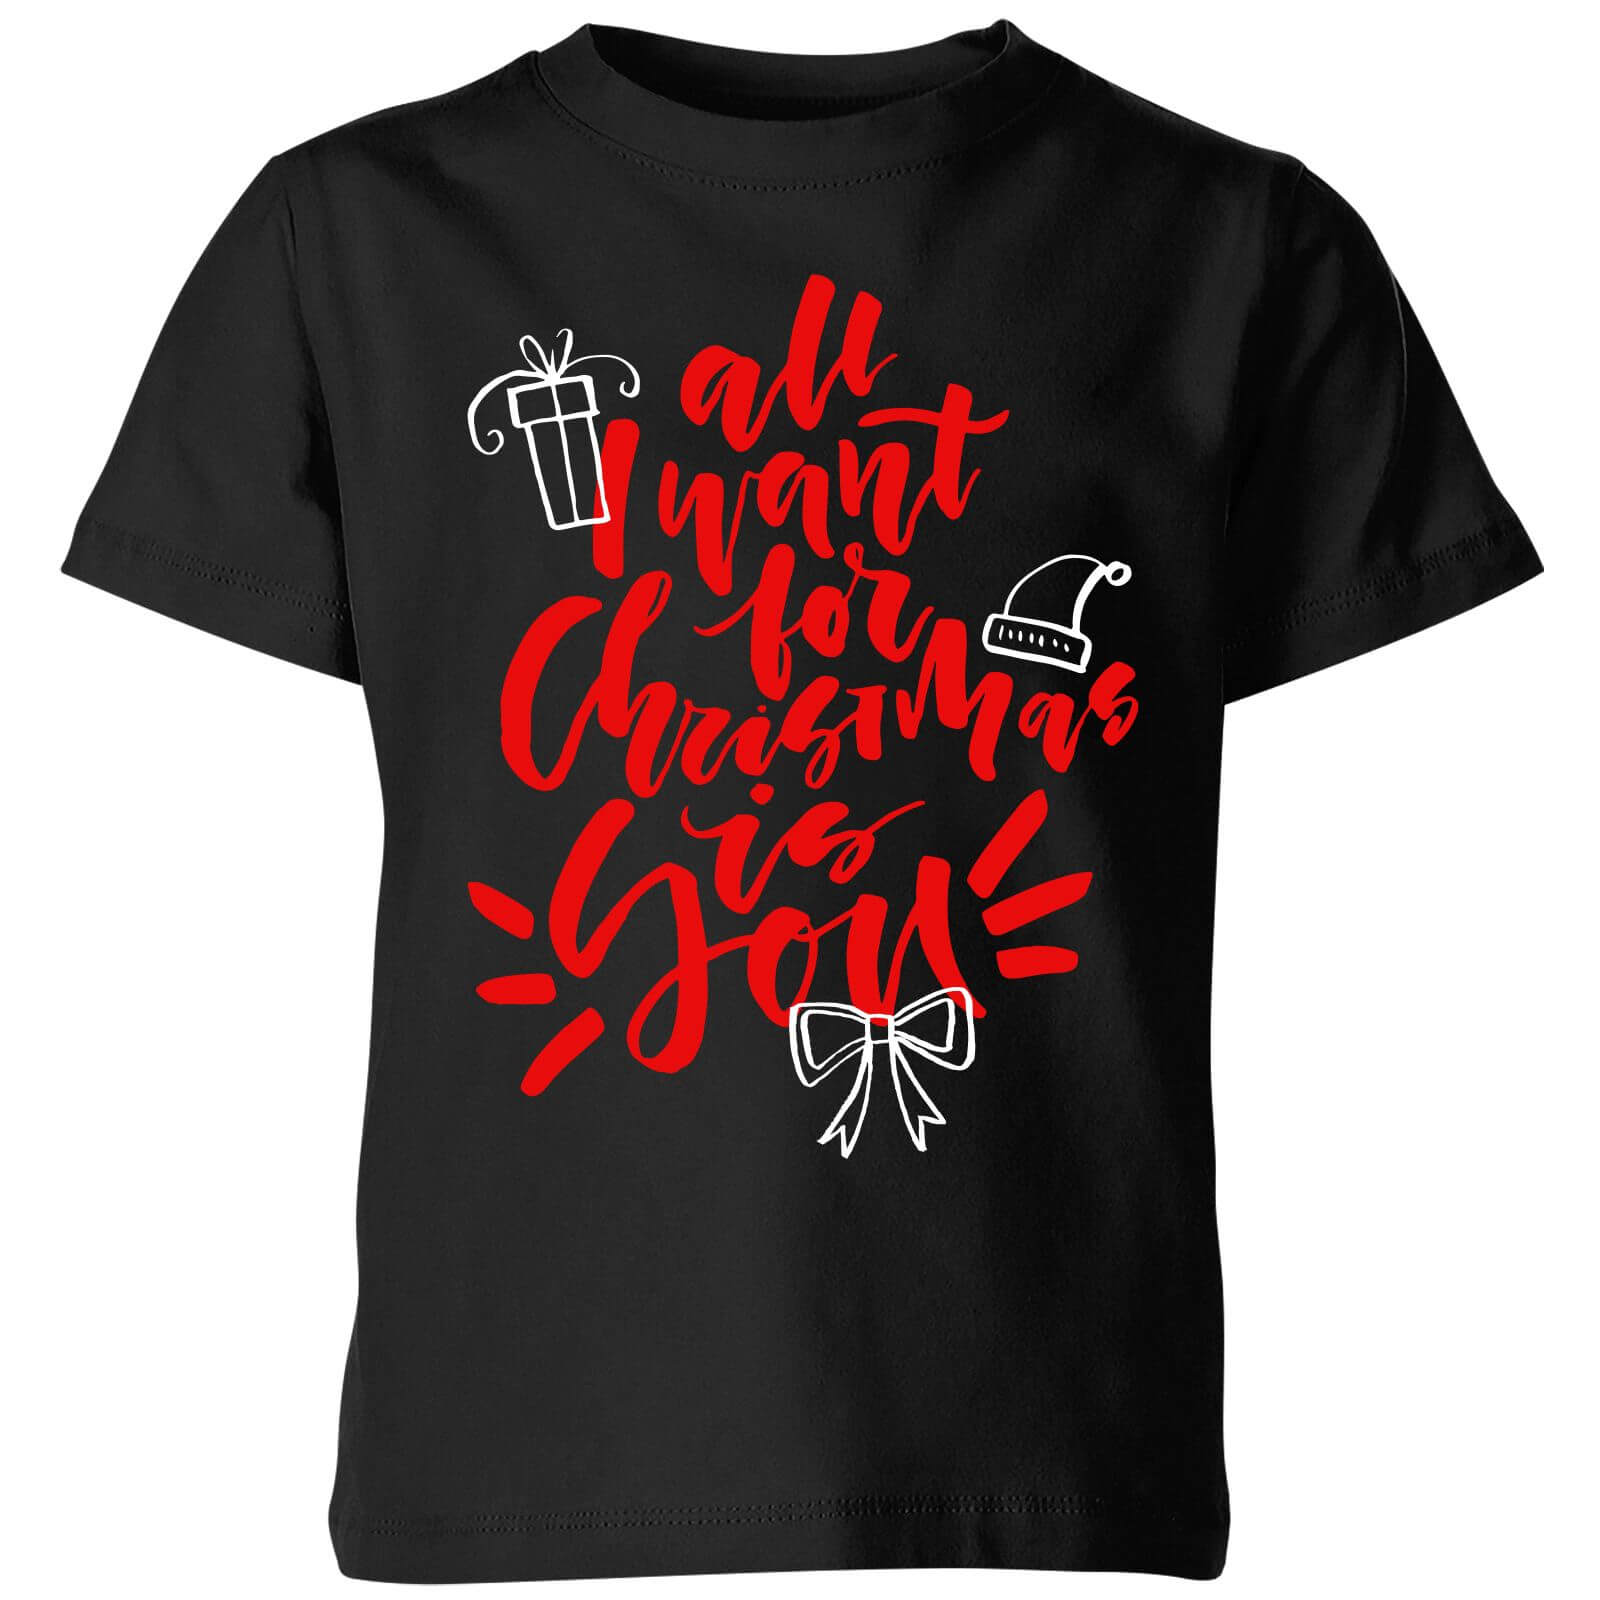 All i want for Christmas Kids' T-Shirt - Black - 3-4 Years - Black